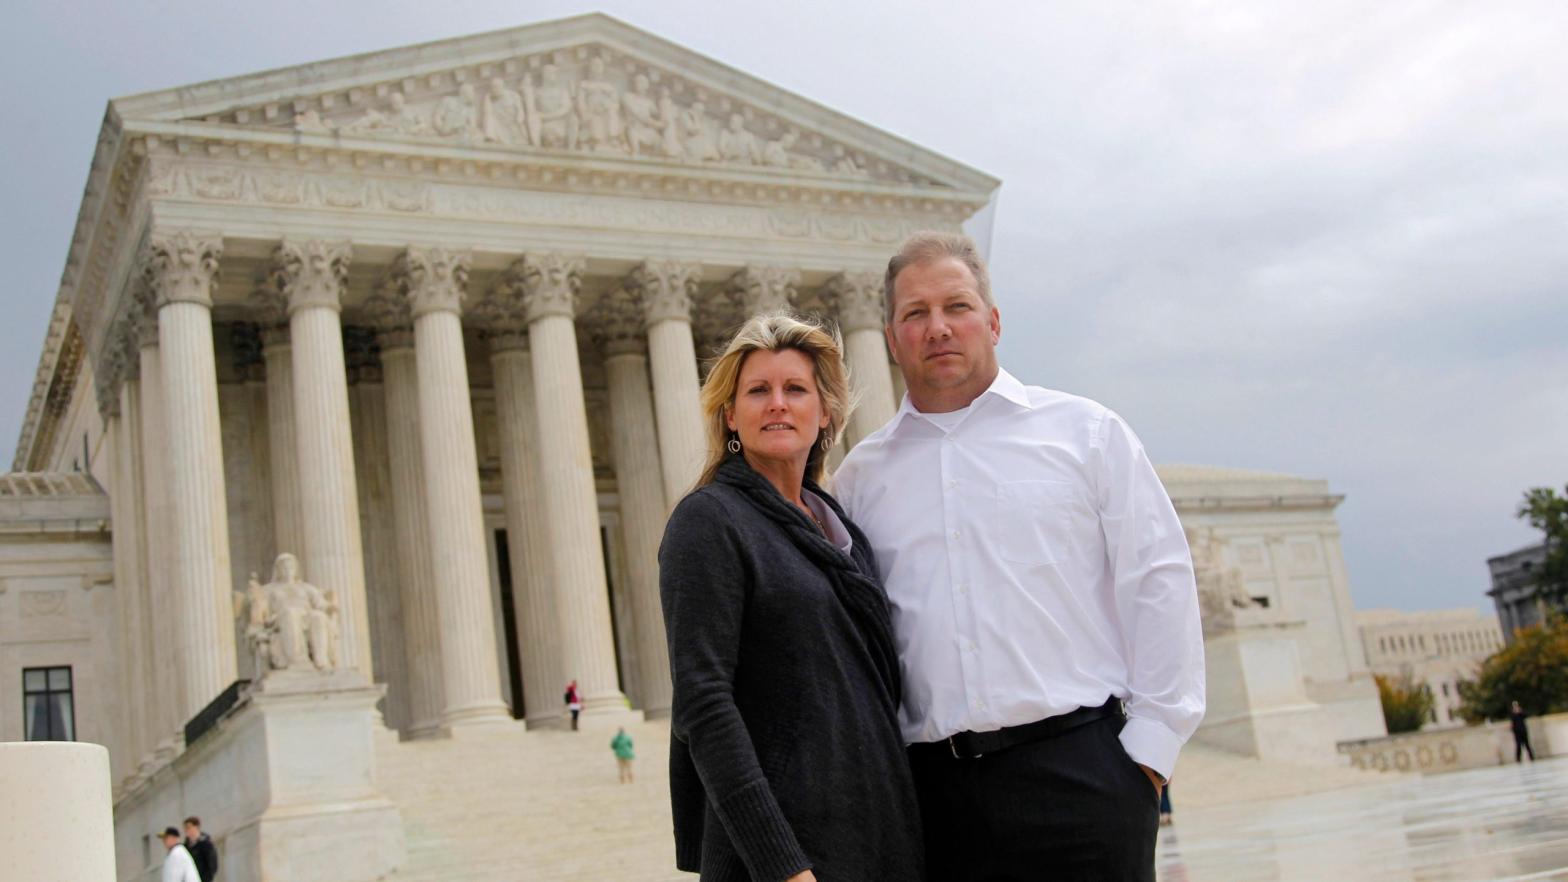 The landowners at the centre of this case, Mike and Chantell Sackett, pose in front of the Supreme Court in 2011. (Photo: Haraz N. Ghanbari, AP)